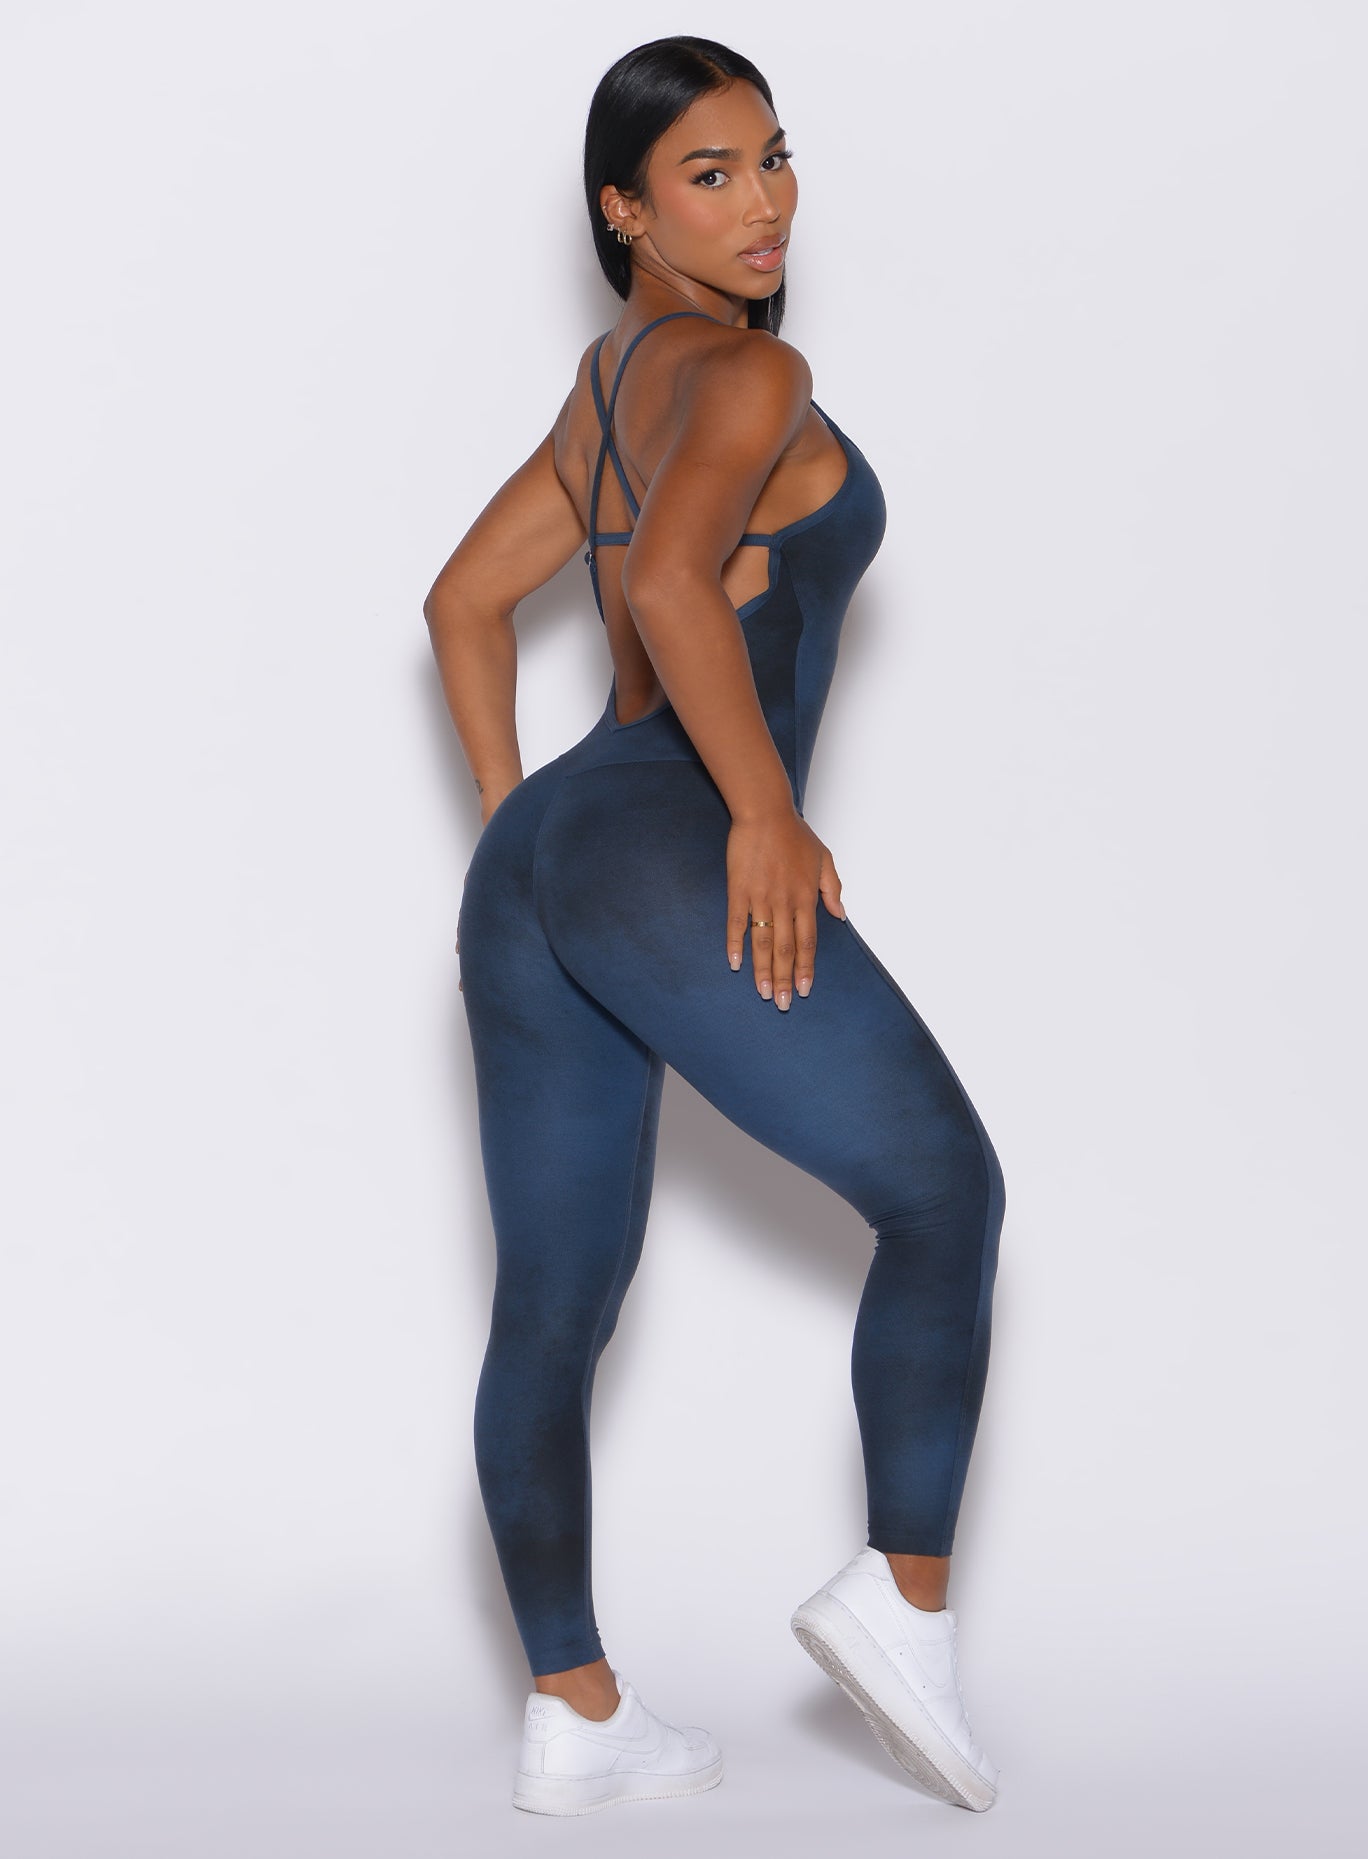 Right side profile view of a model in our Sculpt Bodysuit in Vintage blue color